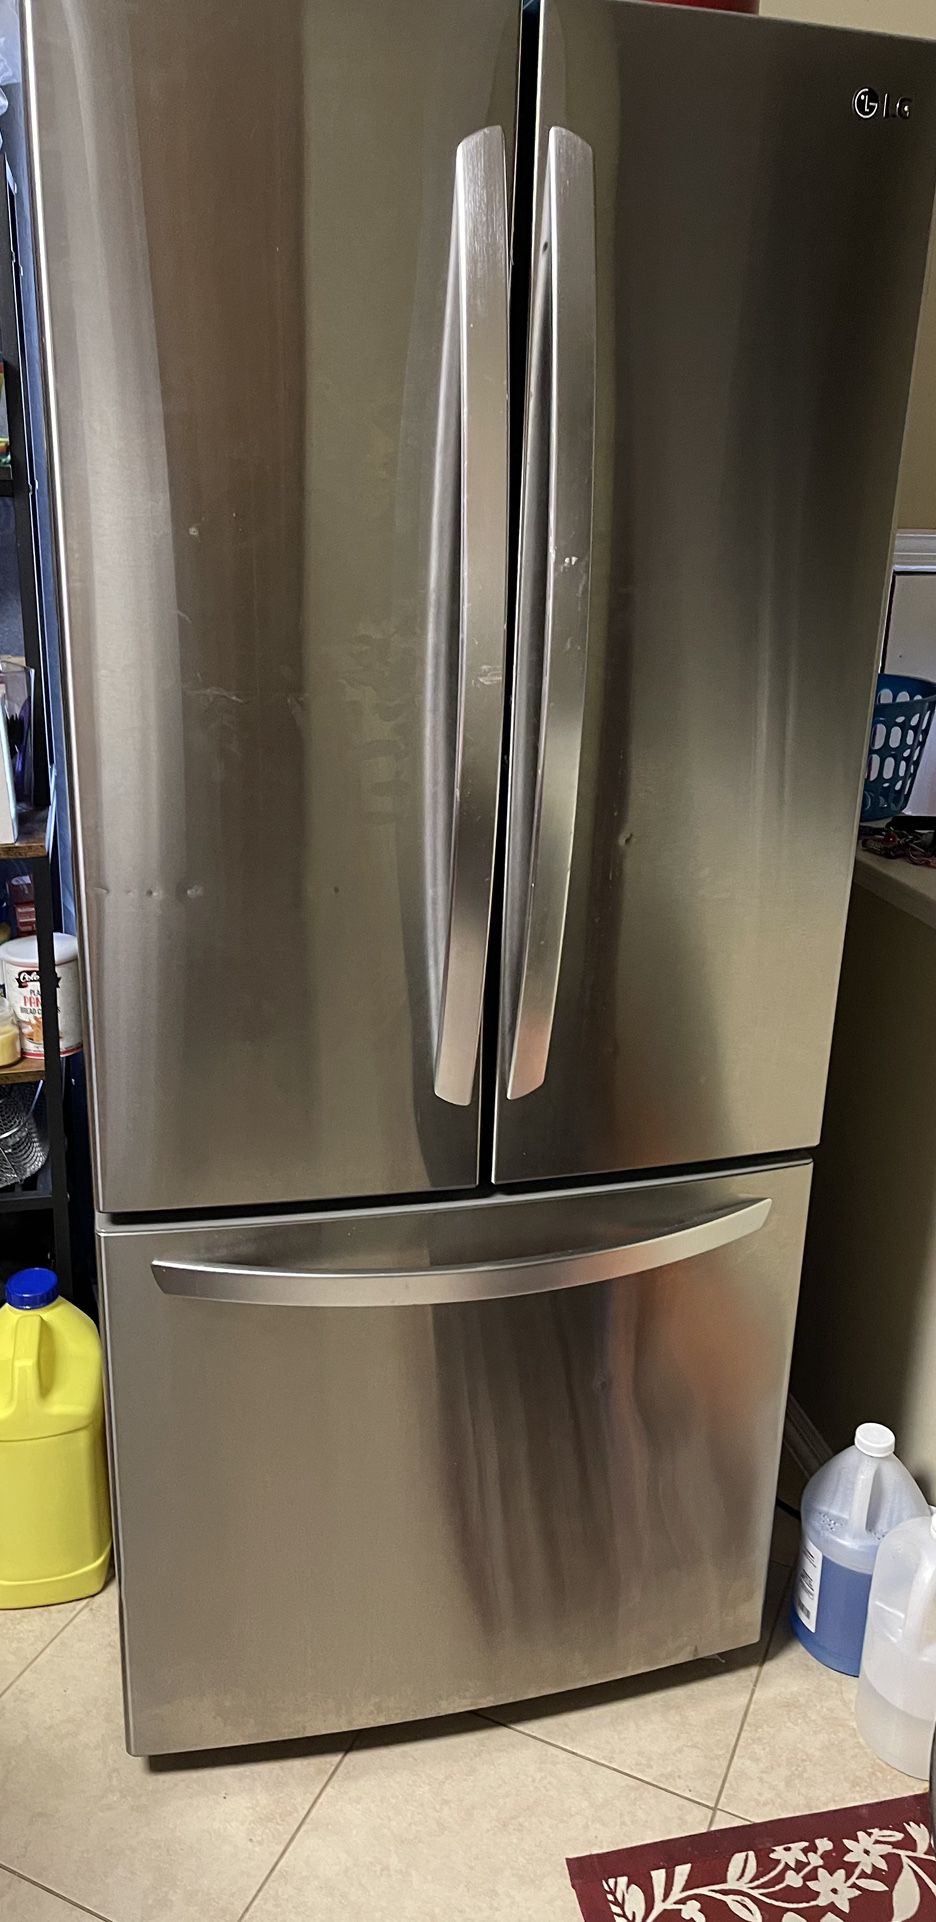 LG French Door Refrigerator And Freezer At The Bottom